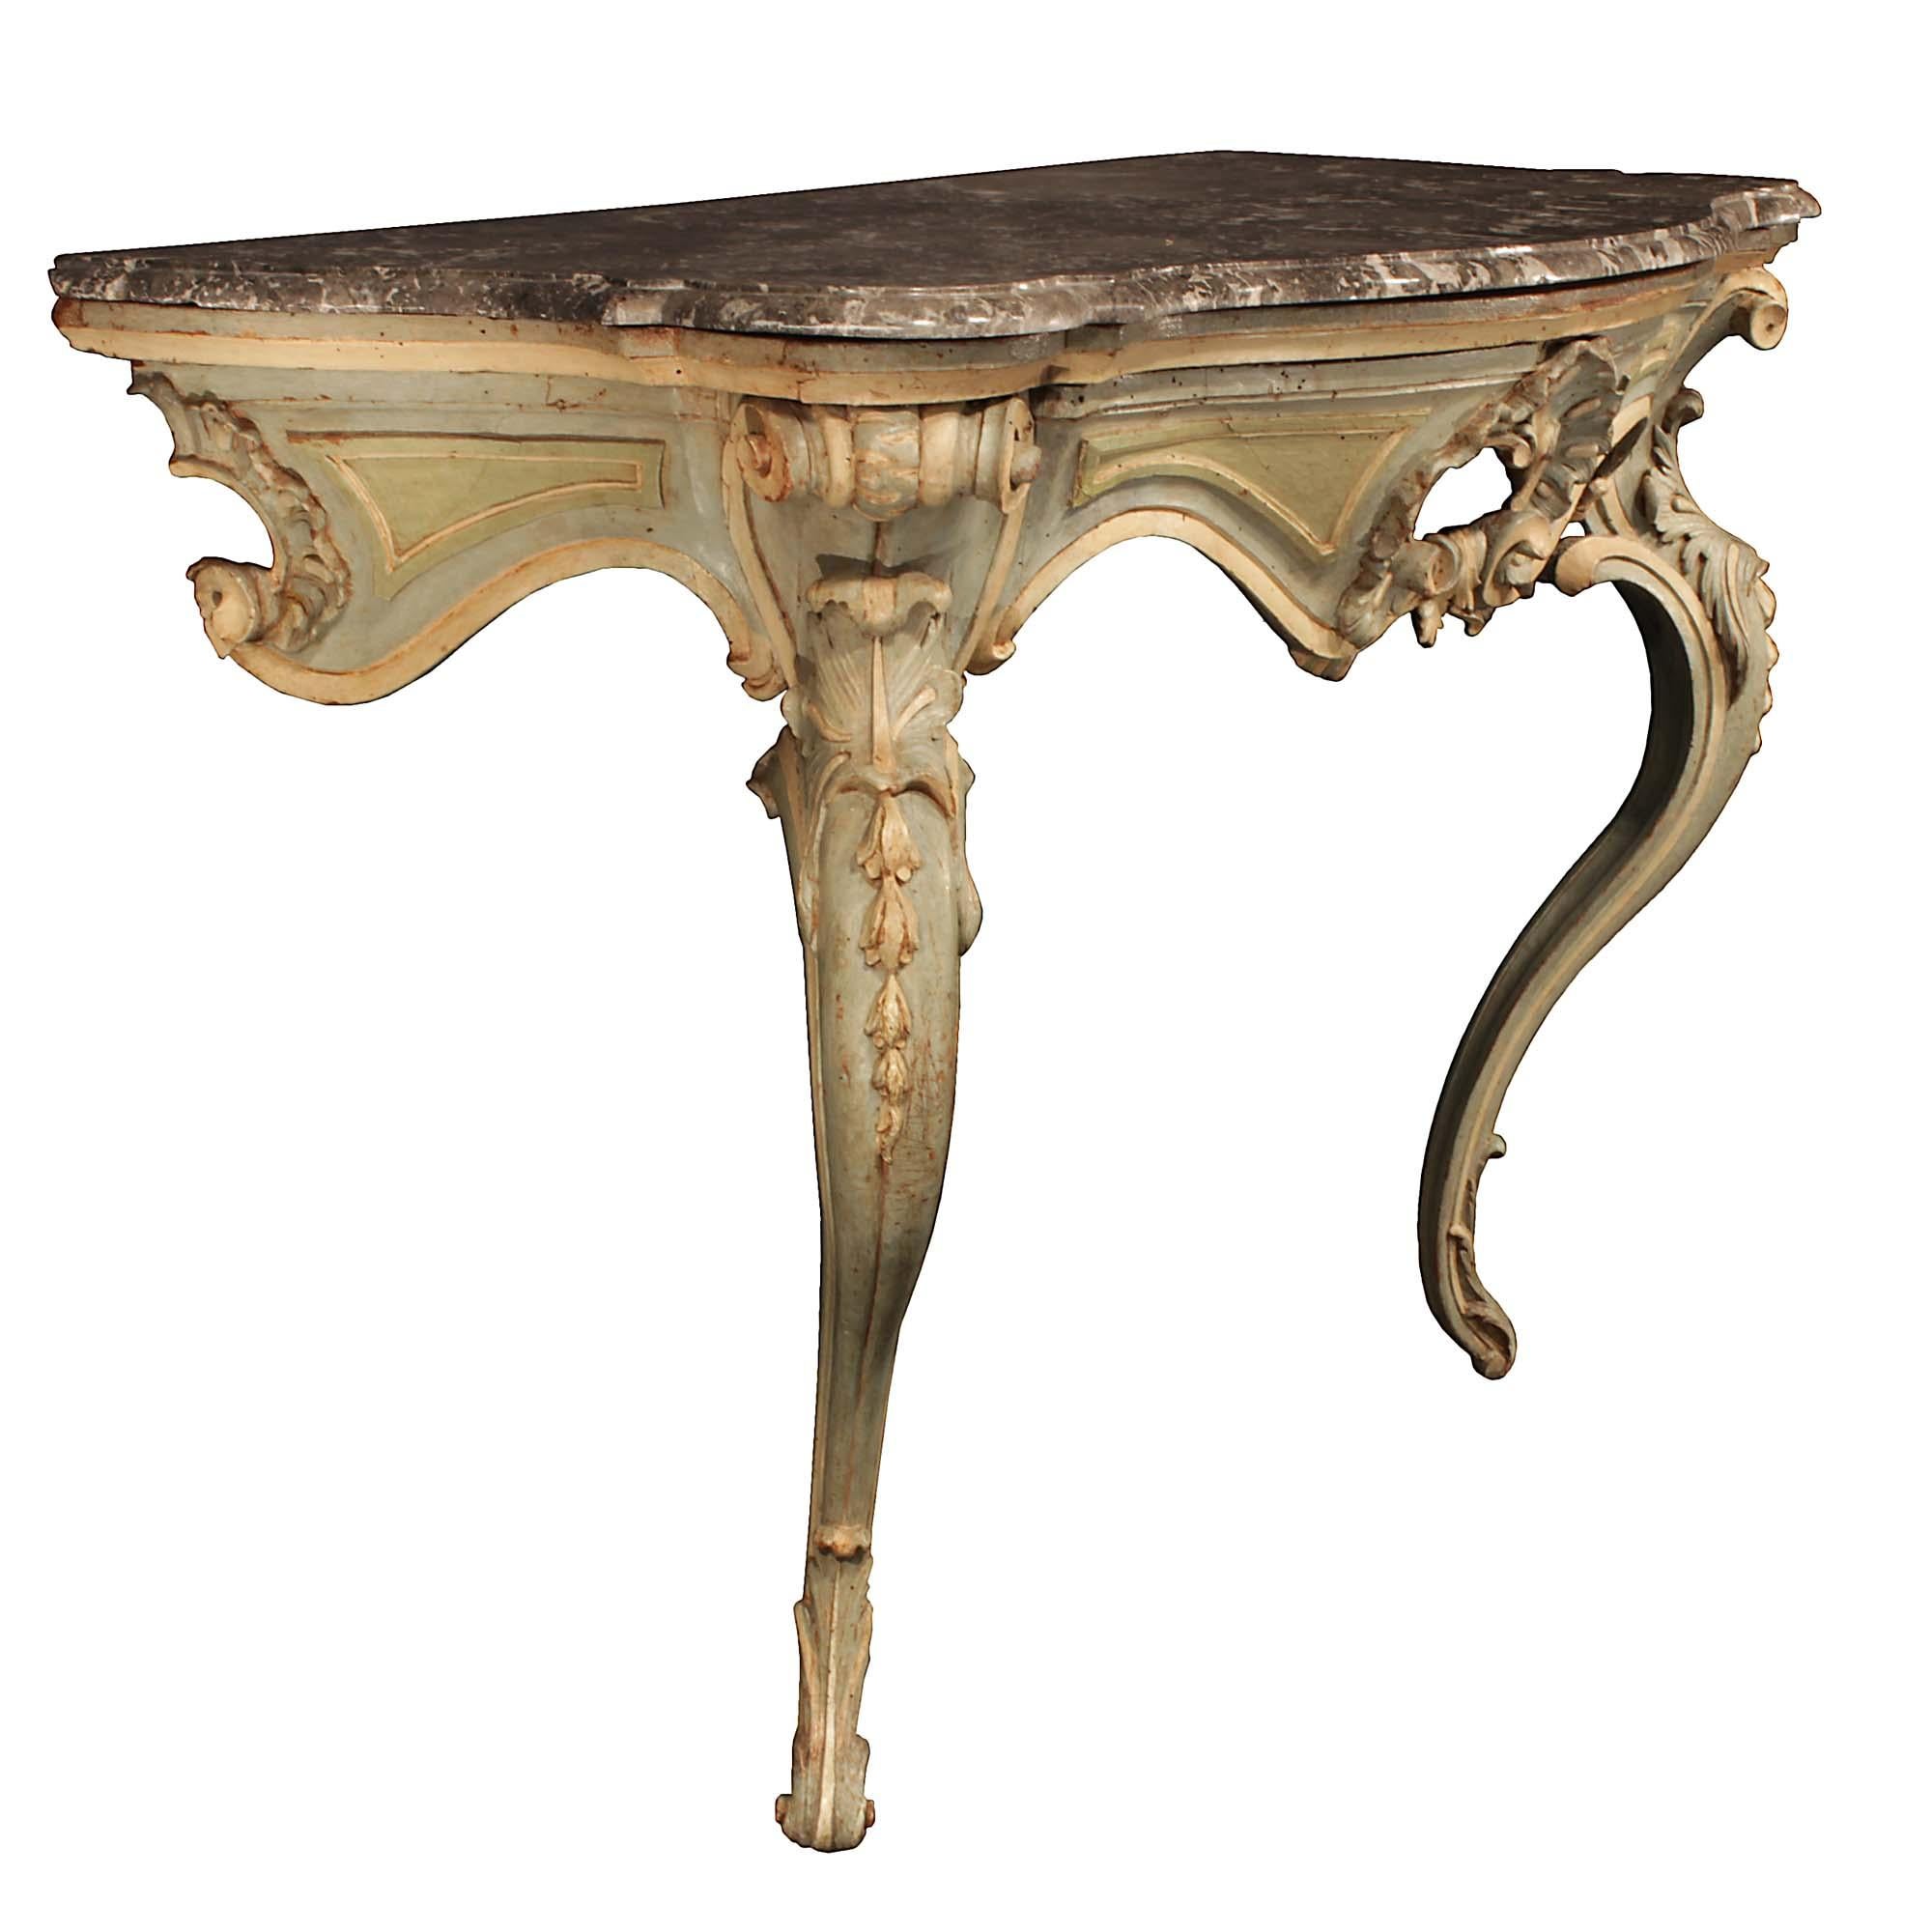 A stunning and extremely decorative Italian 18th century Louis XV period patinated and marble console. The wall mounted console is raised by two slender patinated cabriole legs with carved acanthus leaf accented feet, and larger scrolls at the top.